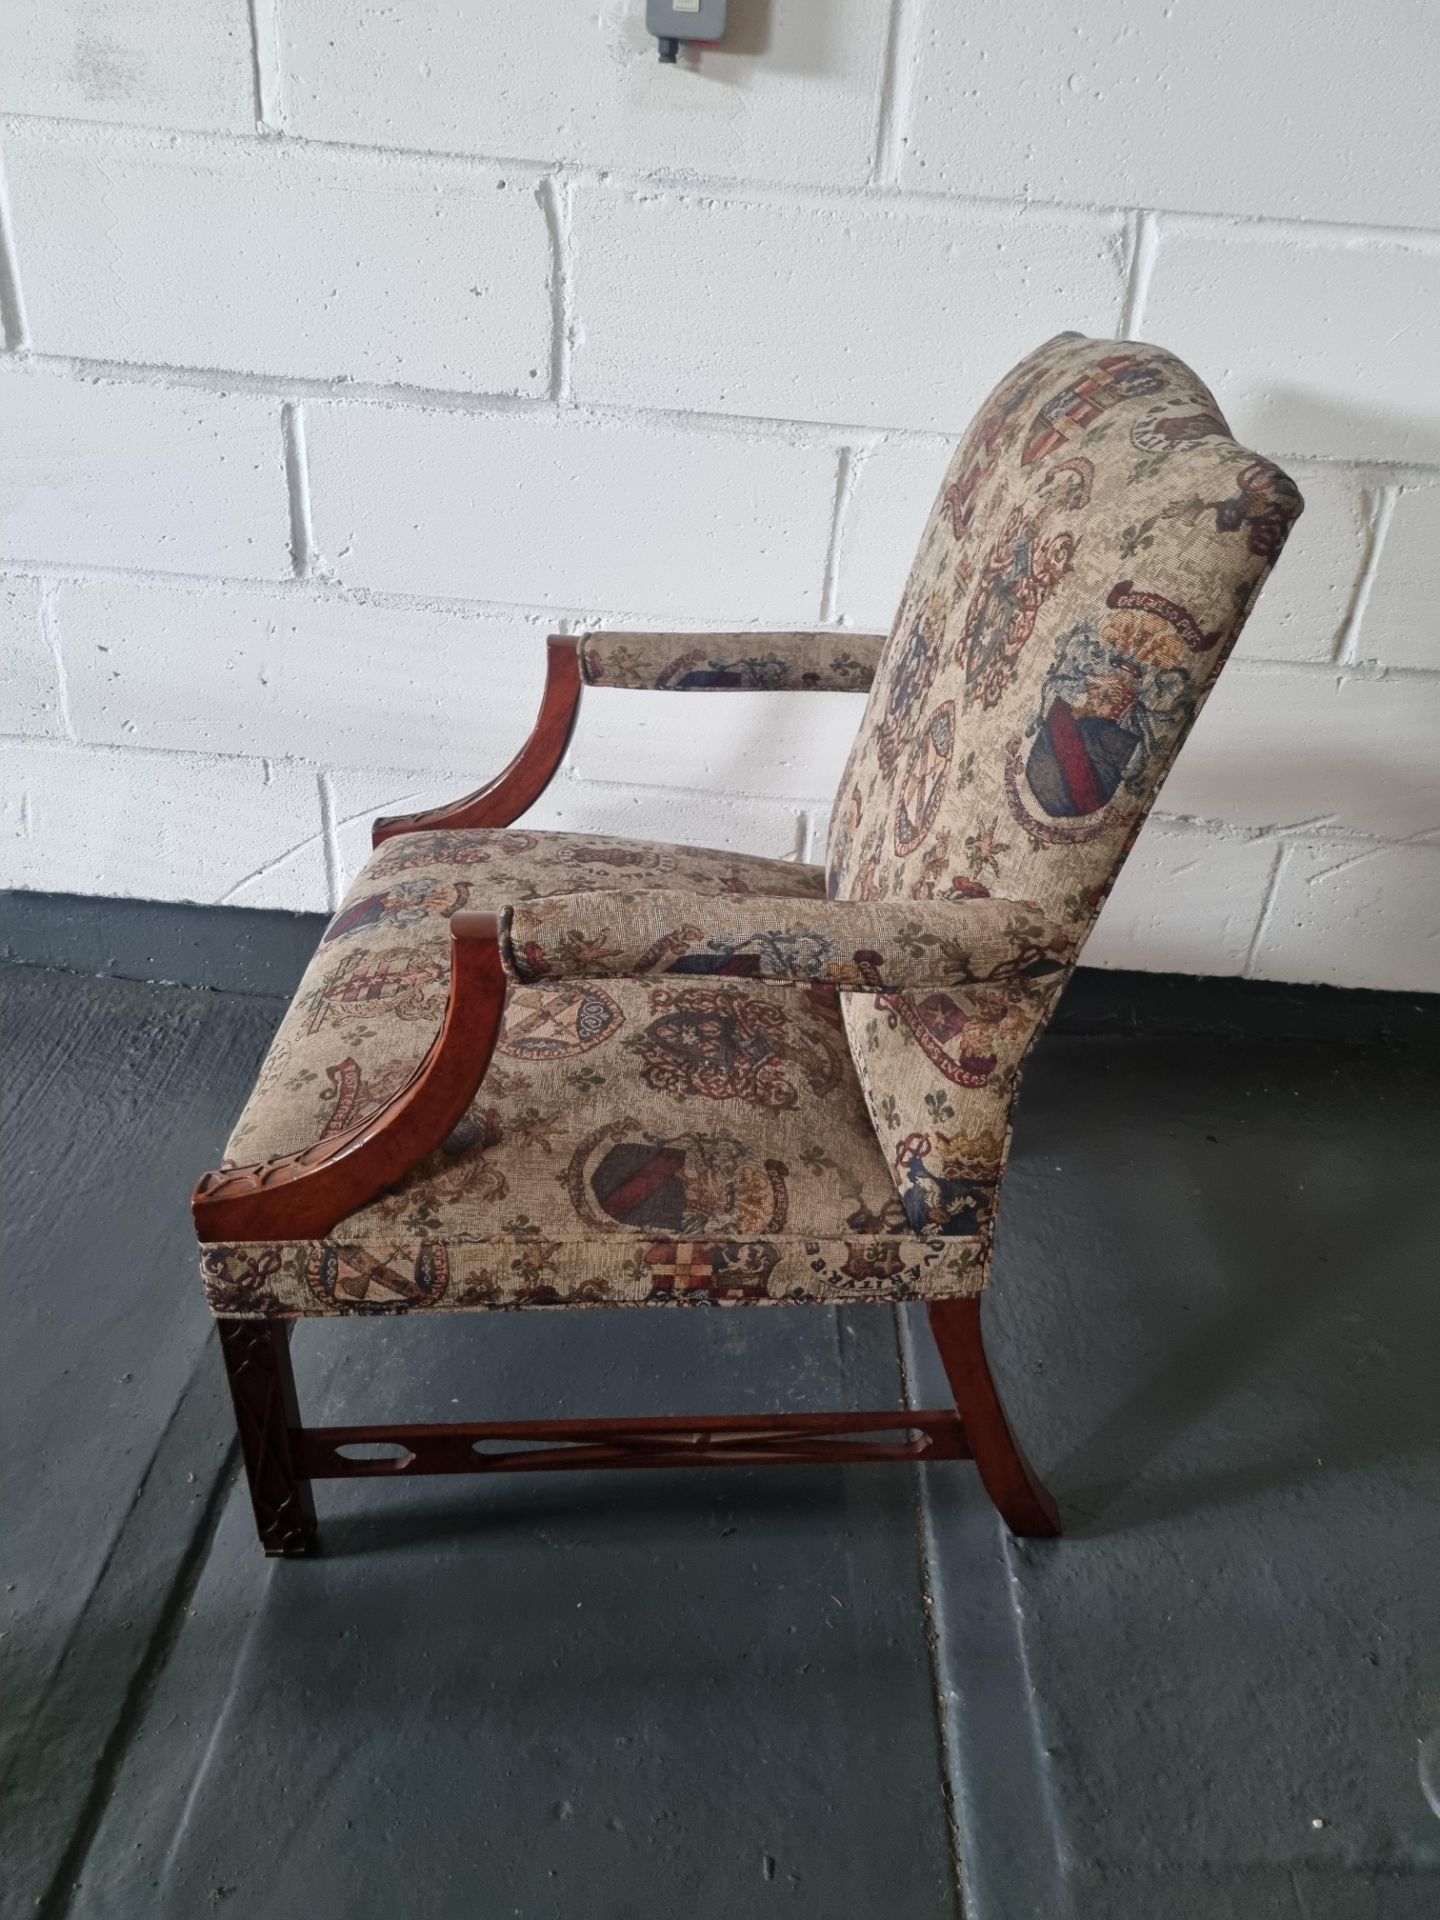 Arthur Brett Mahogany upholstered Arm Chair With Wonderful Carvings On Both Arms & Legs Height 100cm - Image 5 of 5